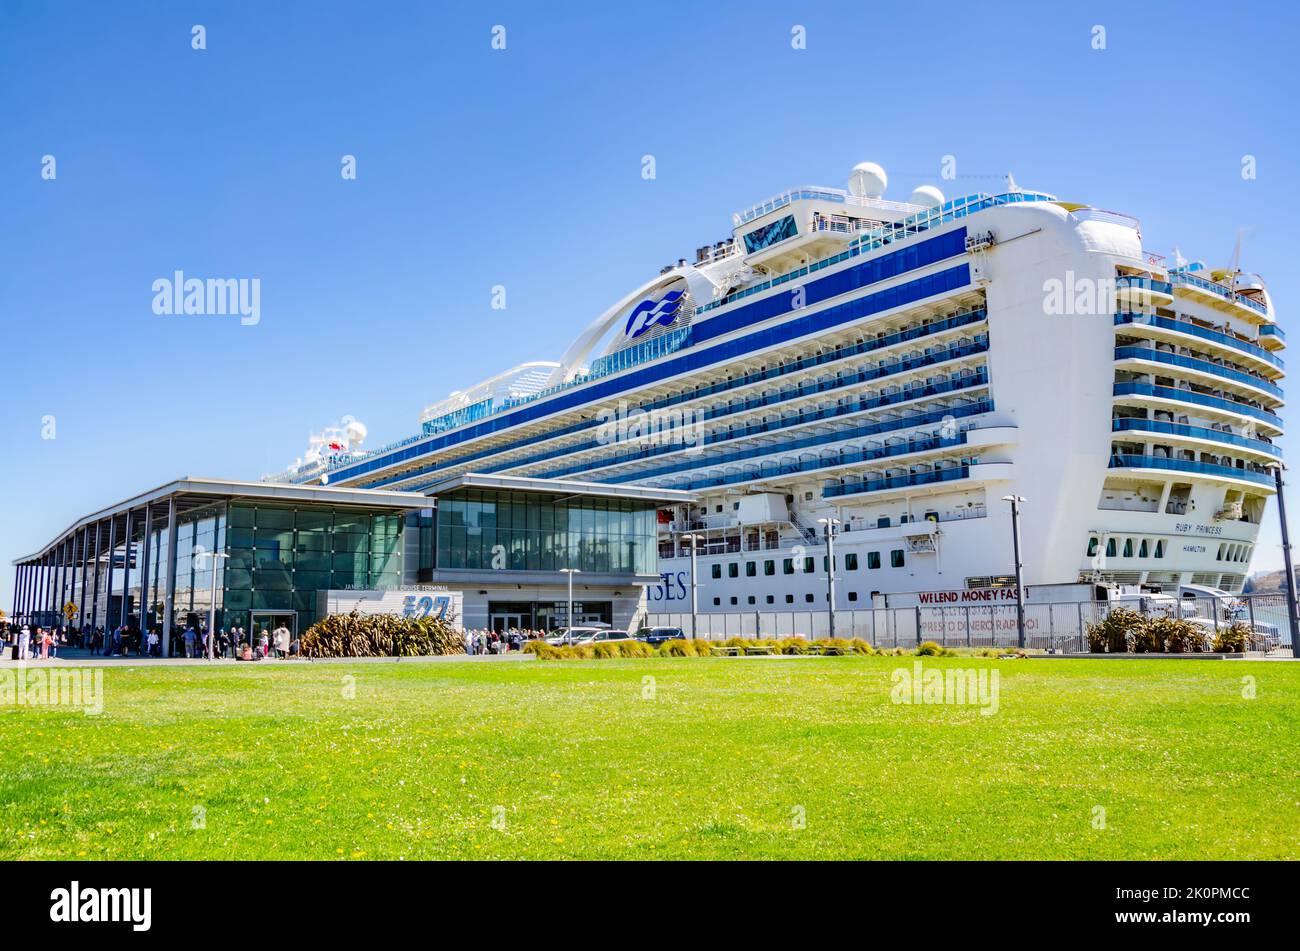 Ruby Princess, a massive cruise liner docked at The James R Herman Cruise Terminal at Pier 27 in The Port of San Francisco, California, USA Stock Photo